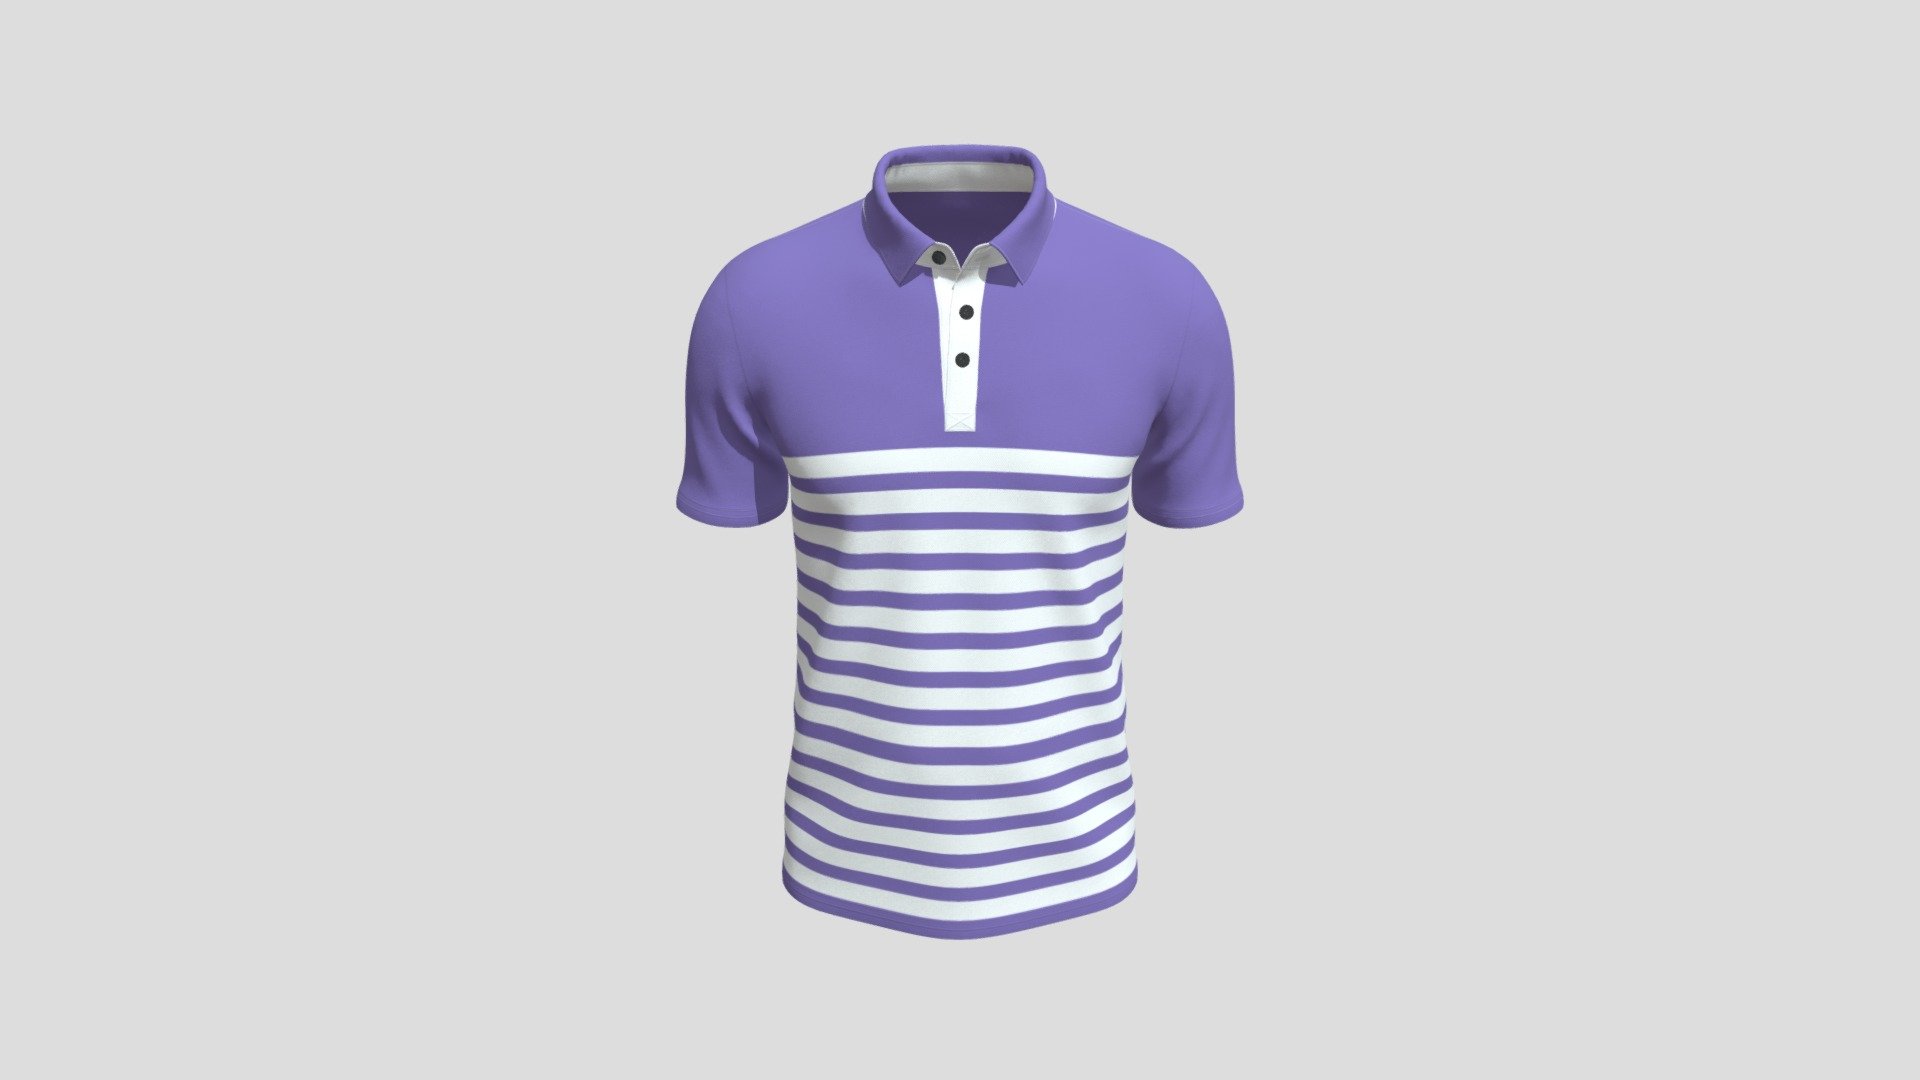 Cloth Title = Men's Regular Fit Polo Shirt 

SKU = DG100046 

Category = Unisex 

Product Type = Tee 

Cloth Length = Regular 

Body Fit = Loose Fit 

Occasion = Sportswear  

Sleeve Style = Sleeveless 


Our Services:

3D Apparel Design.

OBJ,FBX,GLTF Making with High/Low Poly.

Fabric Digitalization.

Mockup making.

3D Teck Pack.

Pattern Making.

2D Illustration.

Cloth Animation and 360 Spin Video.


Contact us:- 

Email: info@digitalfashionwear.com 

Website: https://digitalfashionwear.com 

WhatsApp No: +8801759350445 


We designed all the types of cloth specially focused on product visualization, e-commerce, fitting, and production. 

We will design: 

T-shirts 

Polo shirts 

Hoodies 

Sweatshirt 

Jackets 

Shirts 

TankTops 

Trousers 

Bras 

Underwear 

Blazer 

Aprons 

Leggings 

and All Fashion items. 





Our goal is to make sure what we provide you, meets your demand 3d model